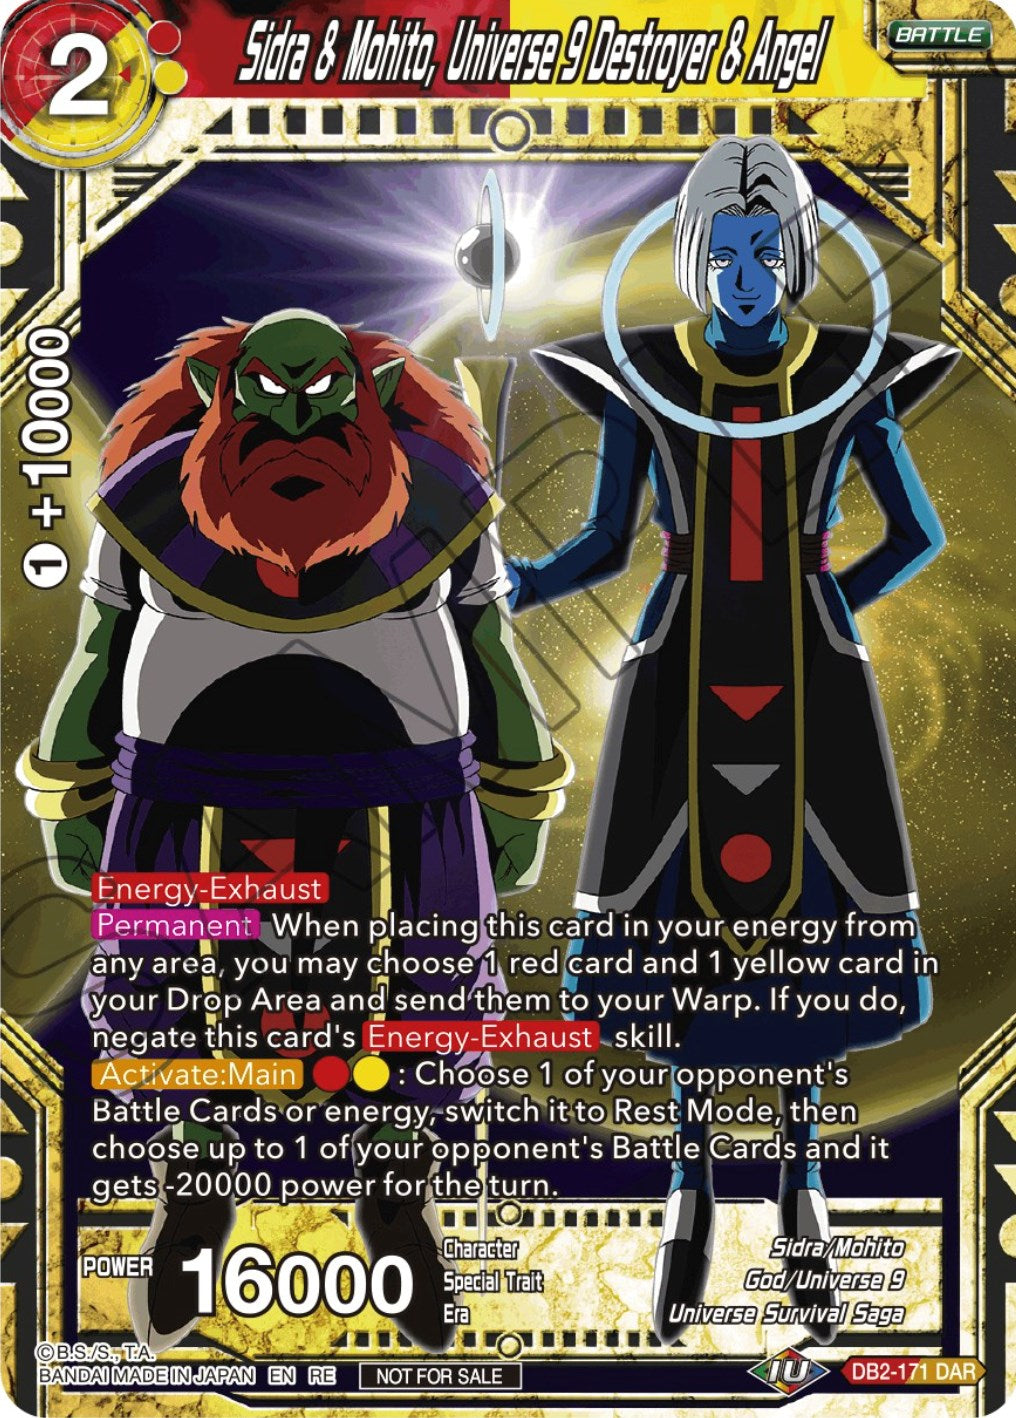 Sidra & Mohito, Universe 9 Destroyer & Angel (Championship Selection Pack 2023 Vol.2) (Silver Foil) (DB2-171) [Tournament Promotion Cards] | Total Play